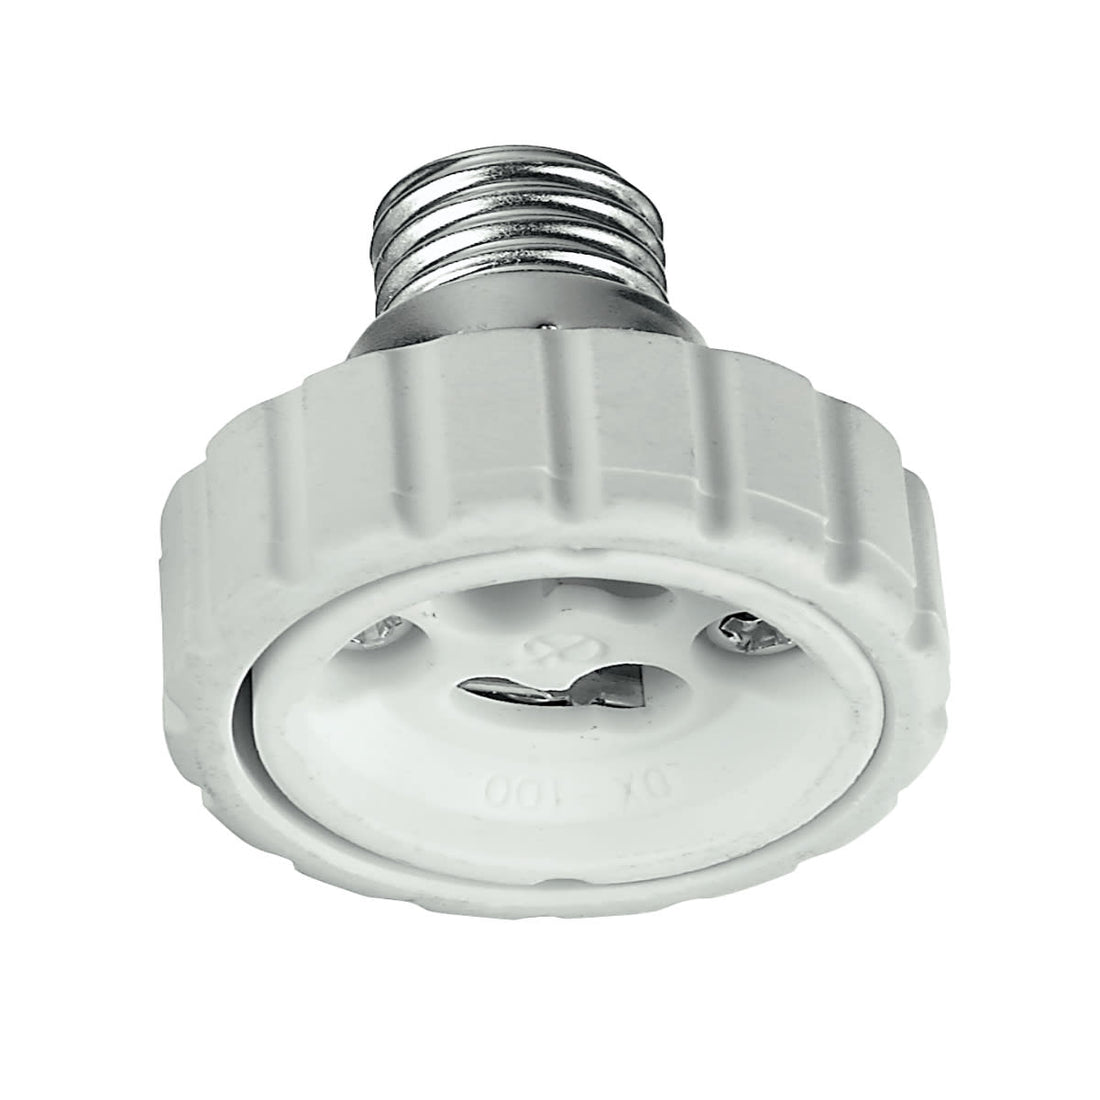 ADAPTER FOR E14 TO GU10 LAMPS